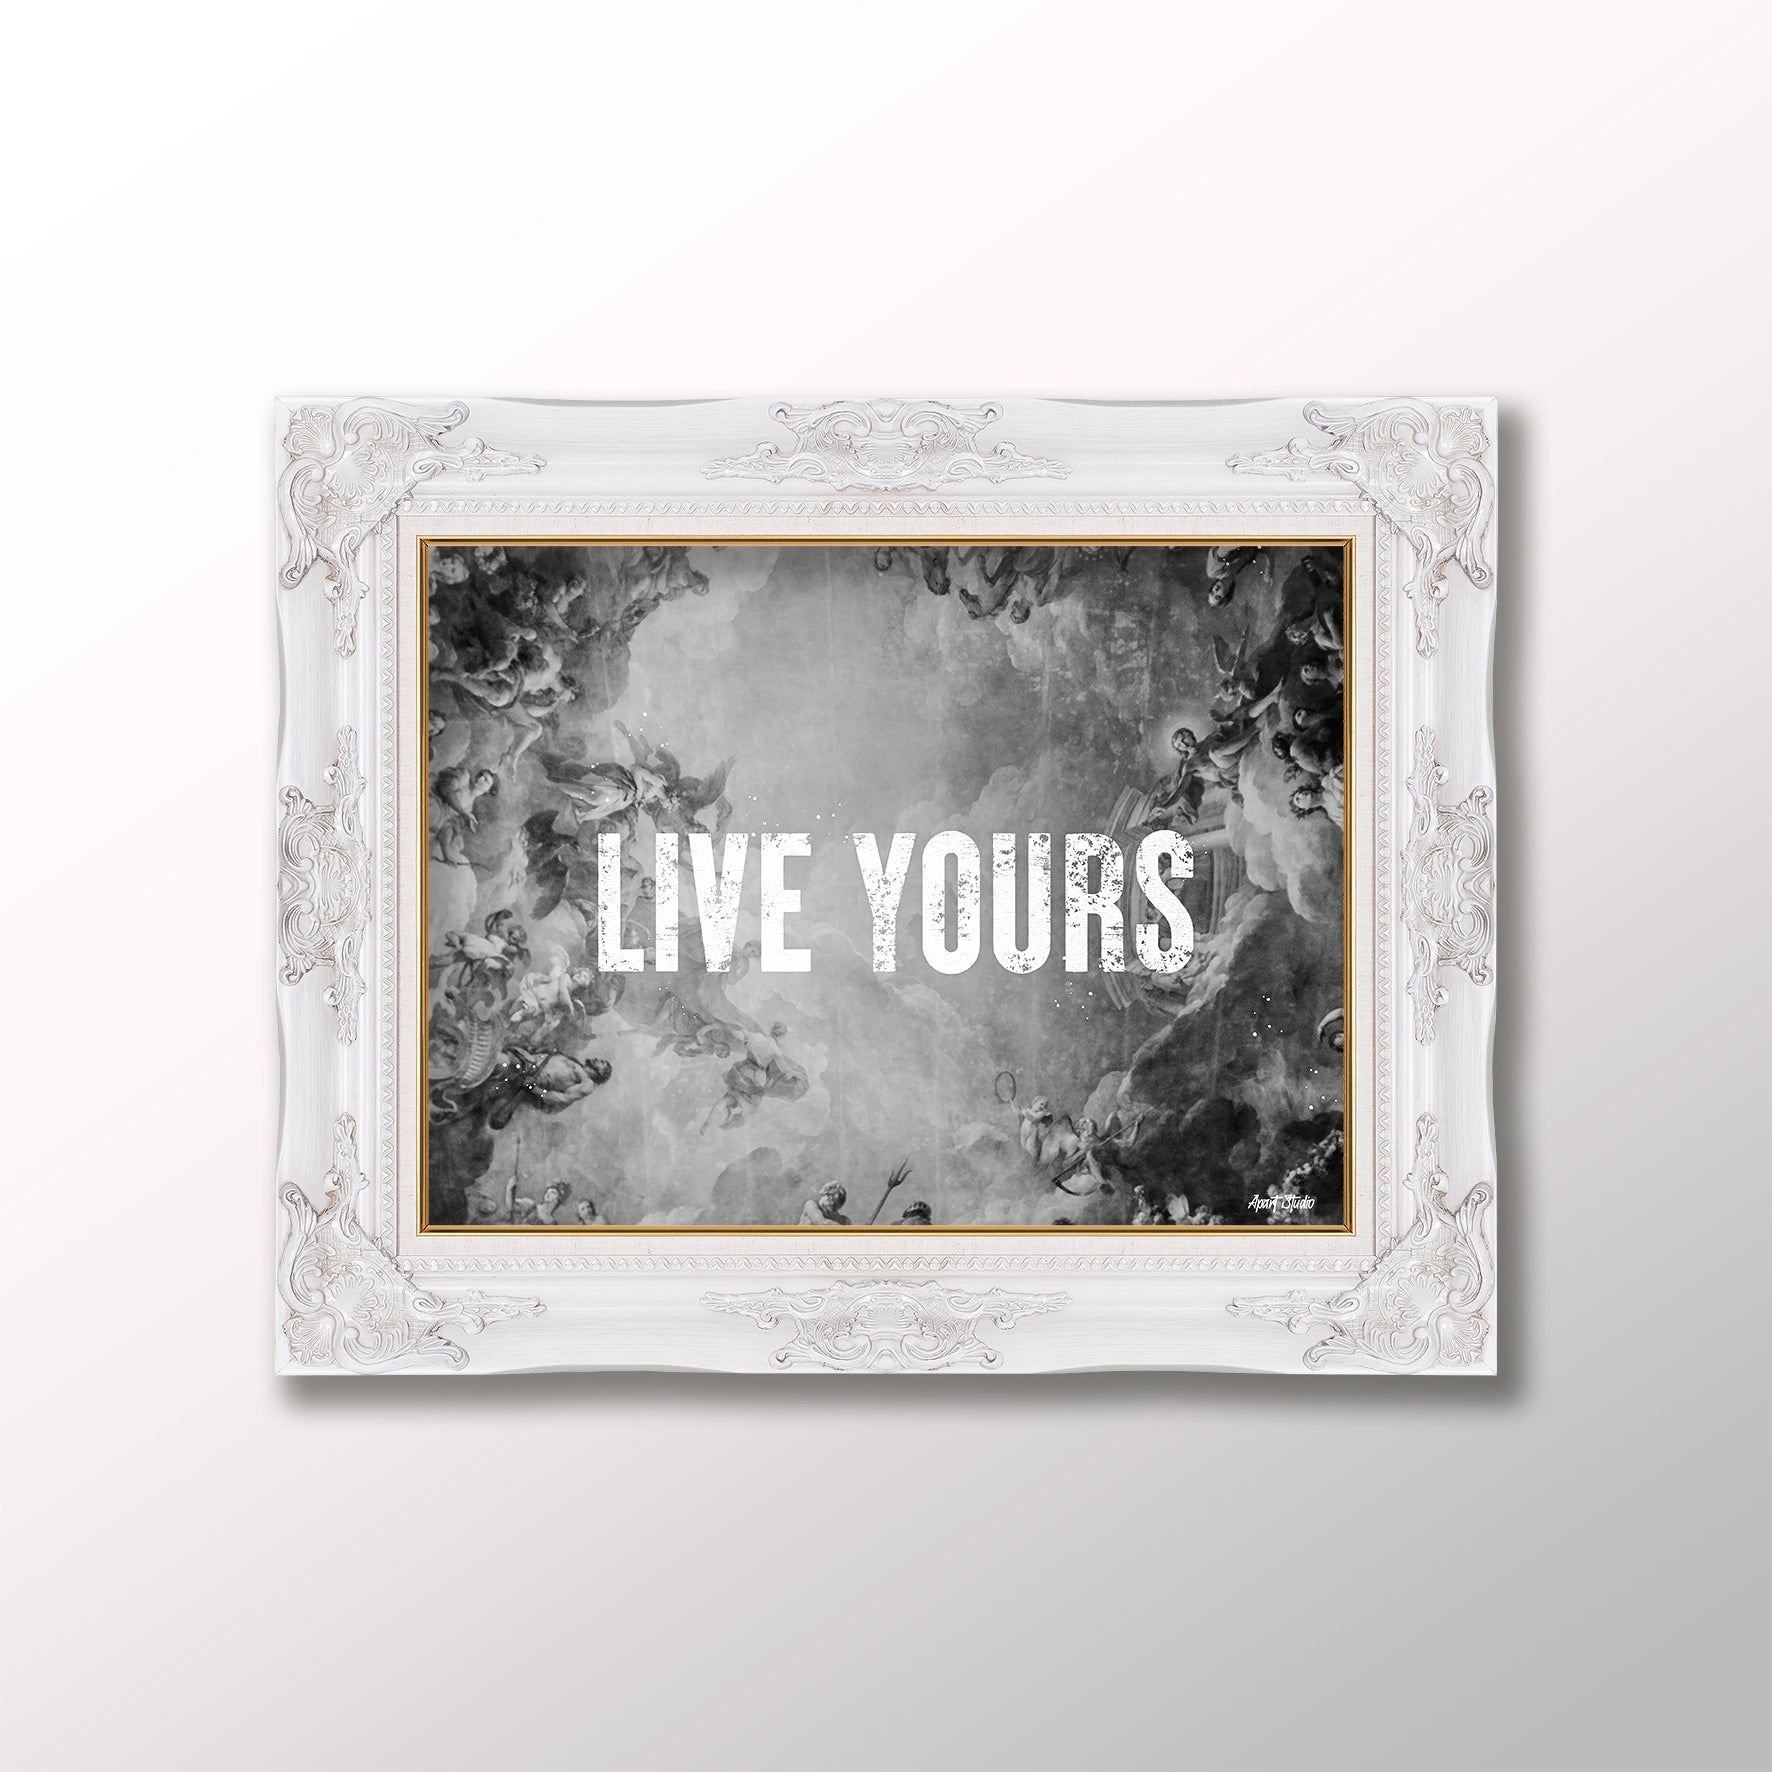 LIVE YOURS B&W Print